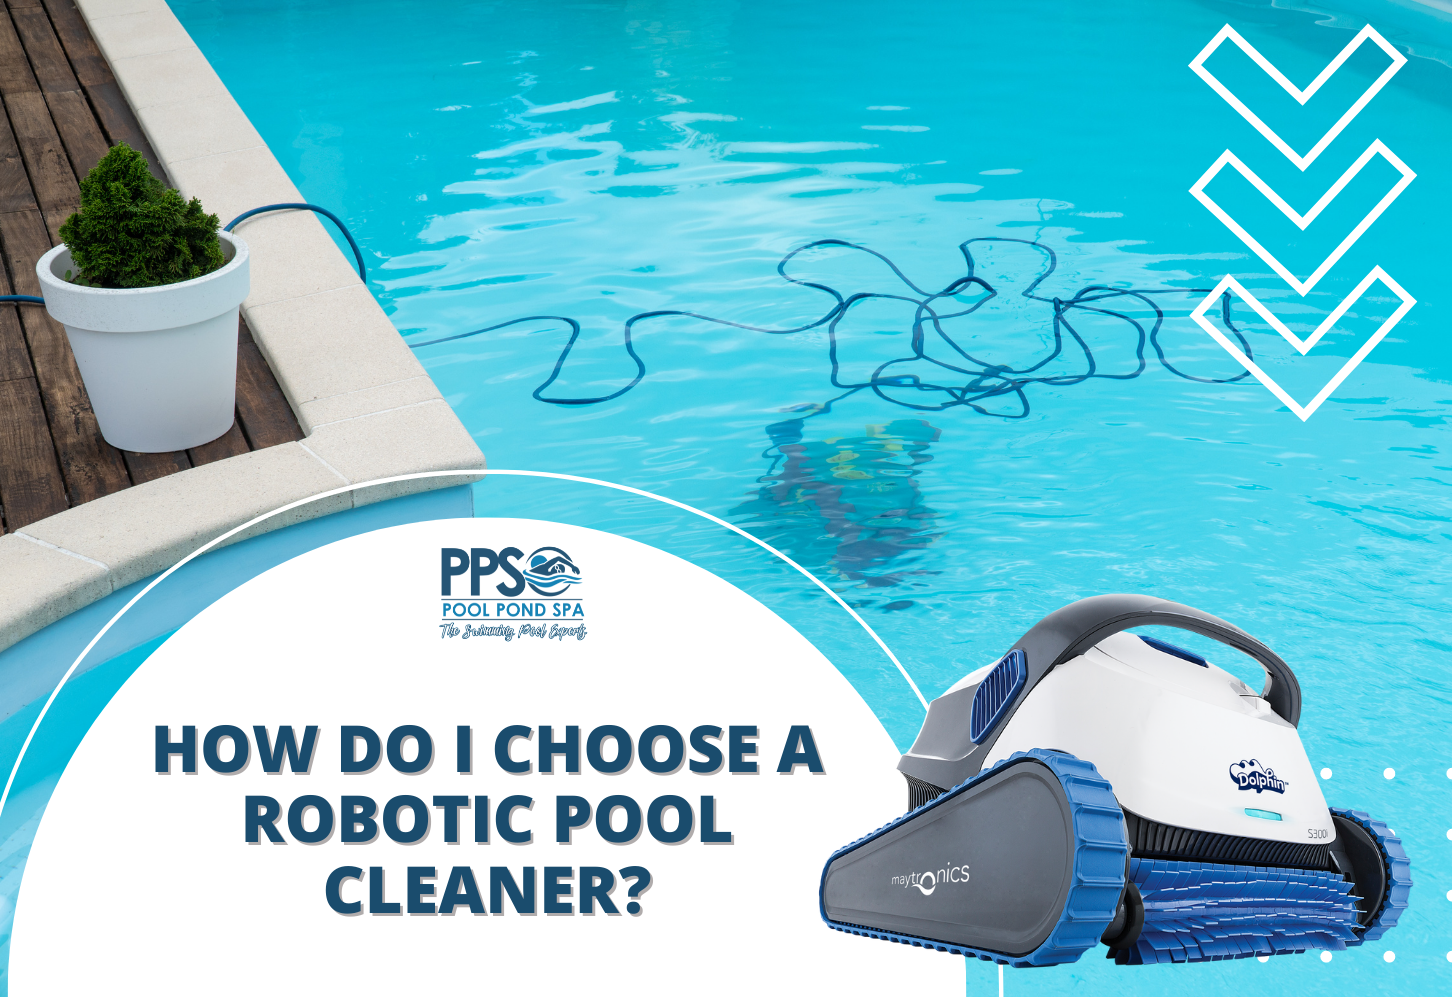 How do i choose a robotic pool cleaner